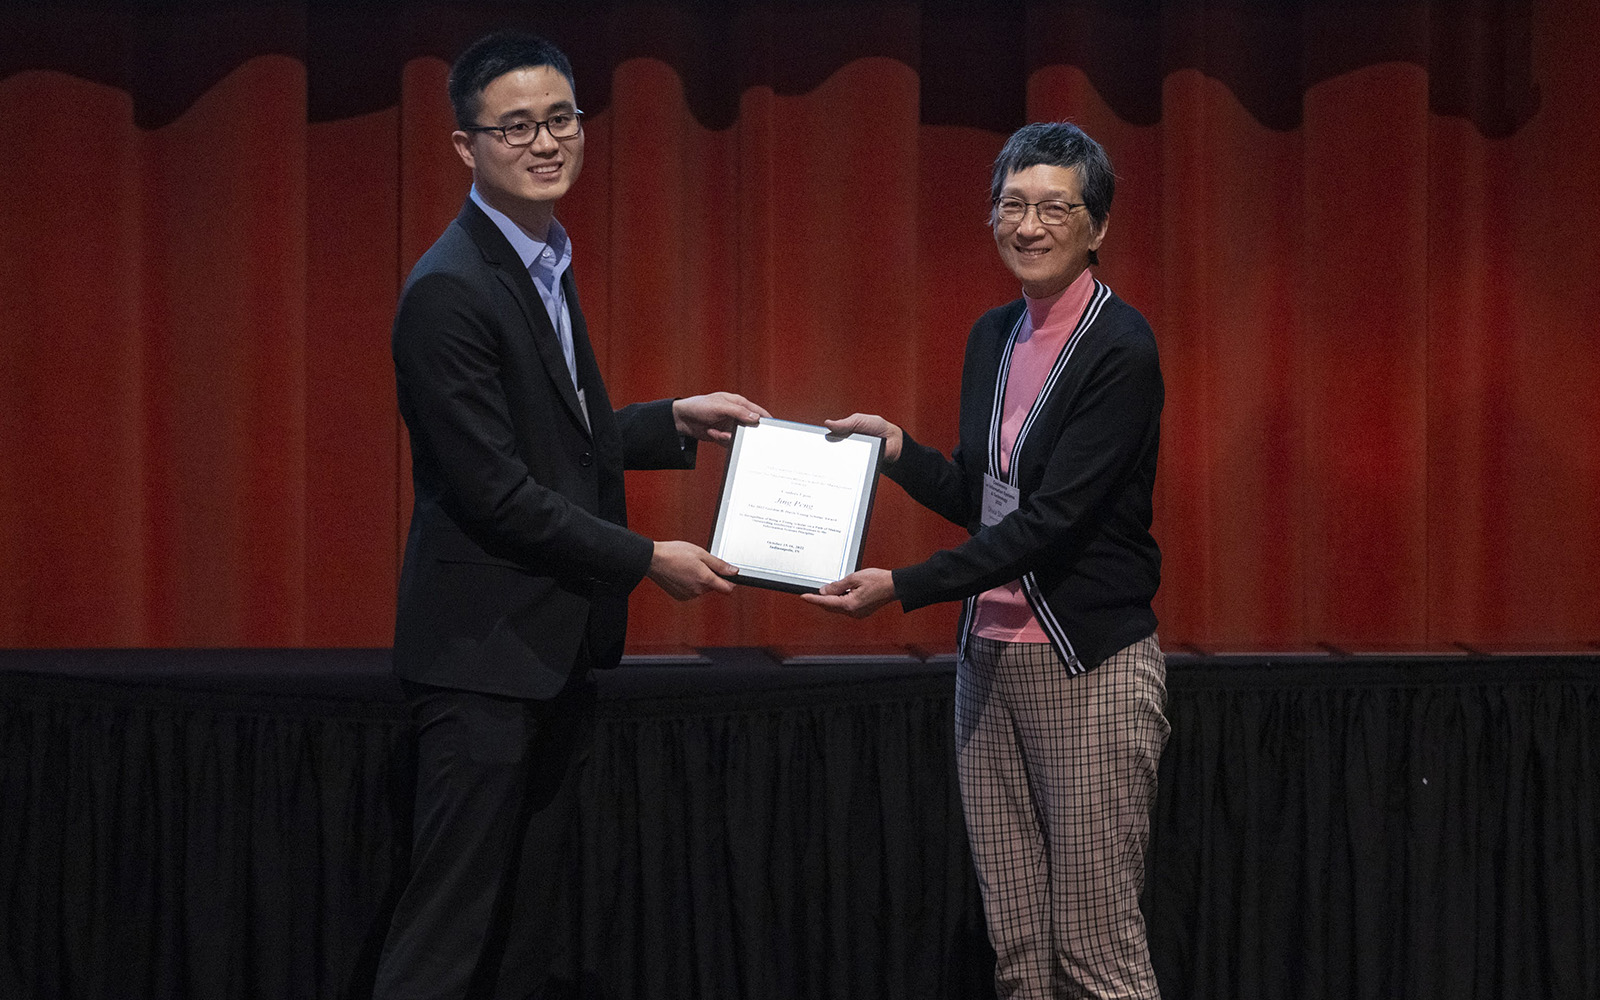 UConn business professor Jing Peng has been honored as one of the most promising young scholars in the information management field. In the photo above, Peng (left) accepts the Gordon B. Davis Young Scholar Award from ISS President Oliver Sheng.